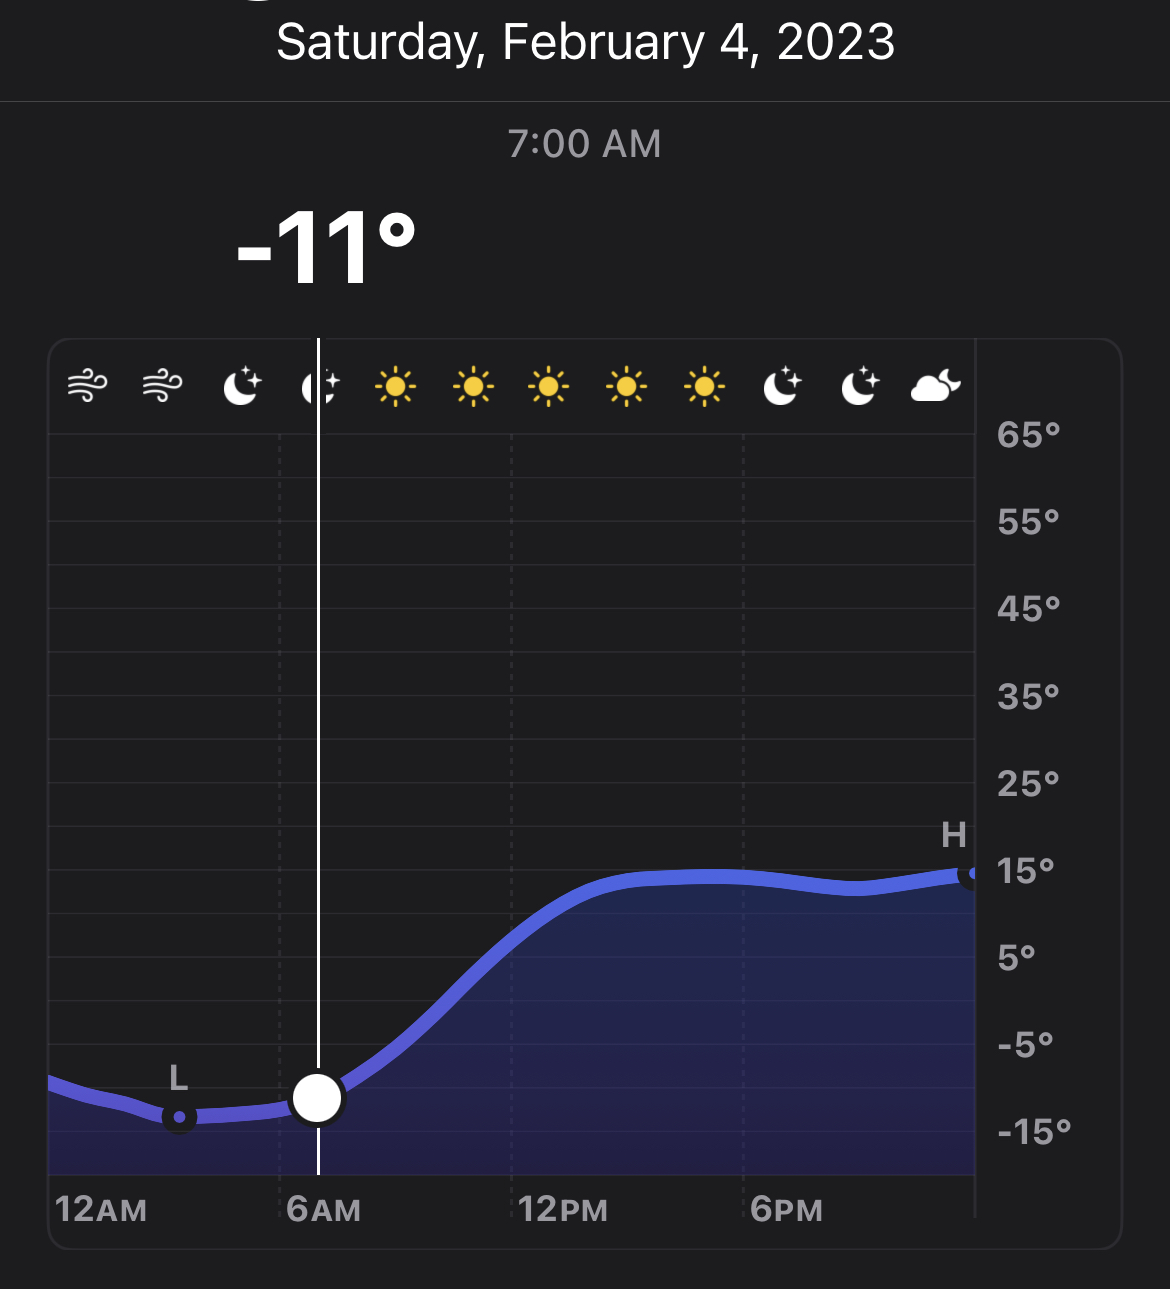 Screenshot of a weather forecast showing that the "feels like" temperature will be -11 degrees Fahrenheit tomorrow, Saturday February 4th 2023. 